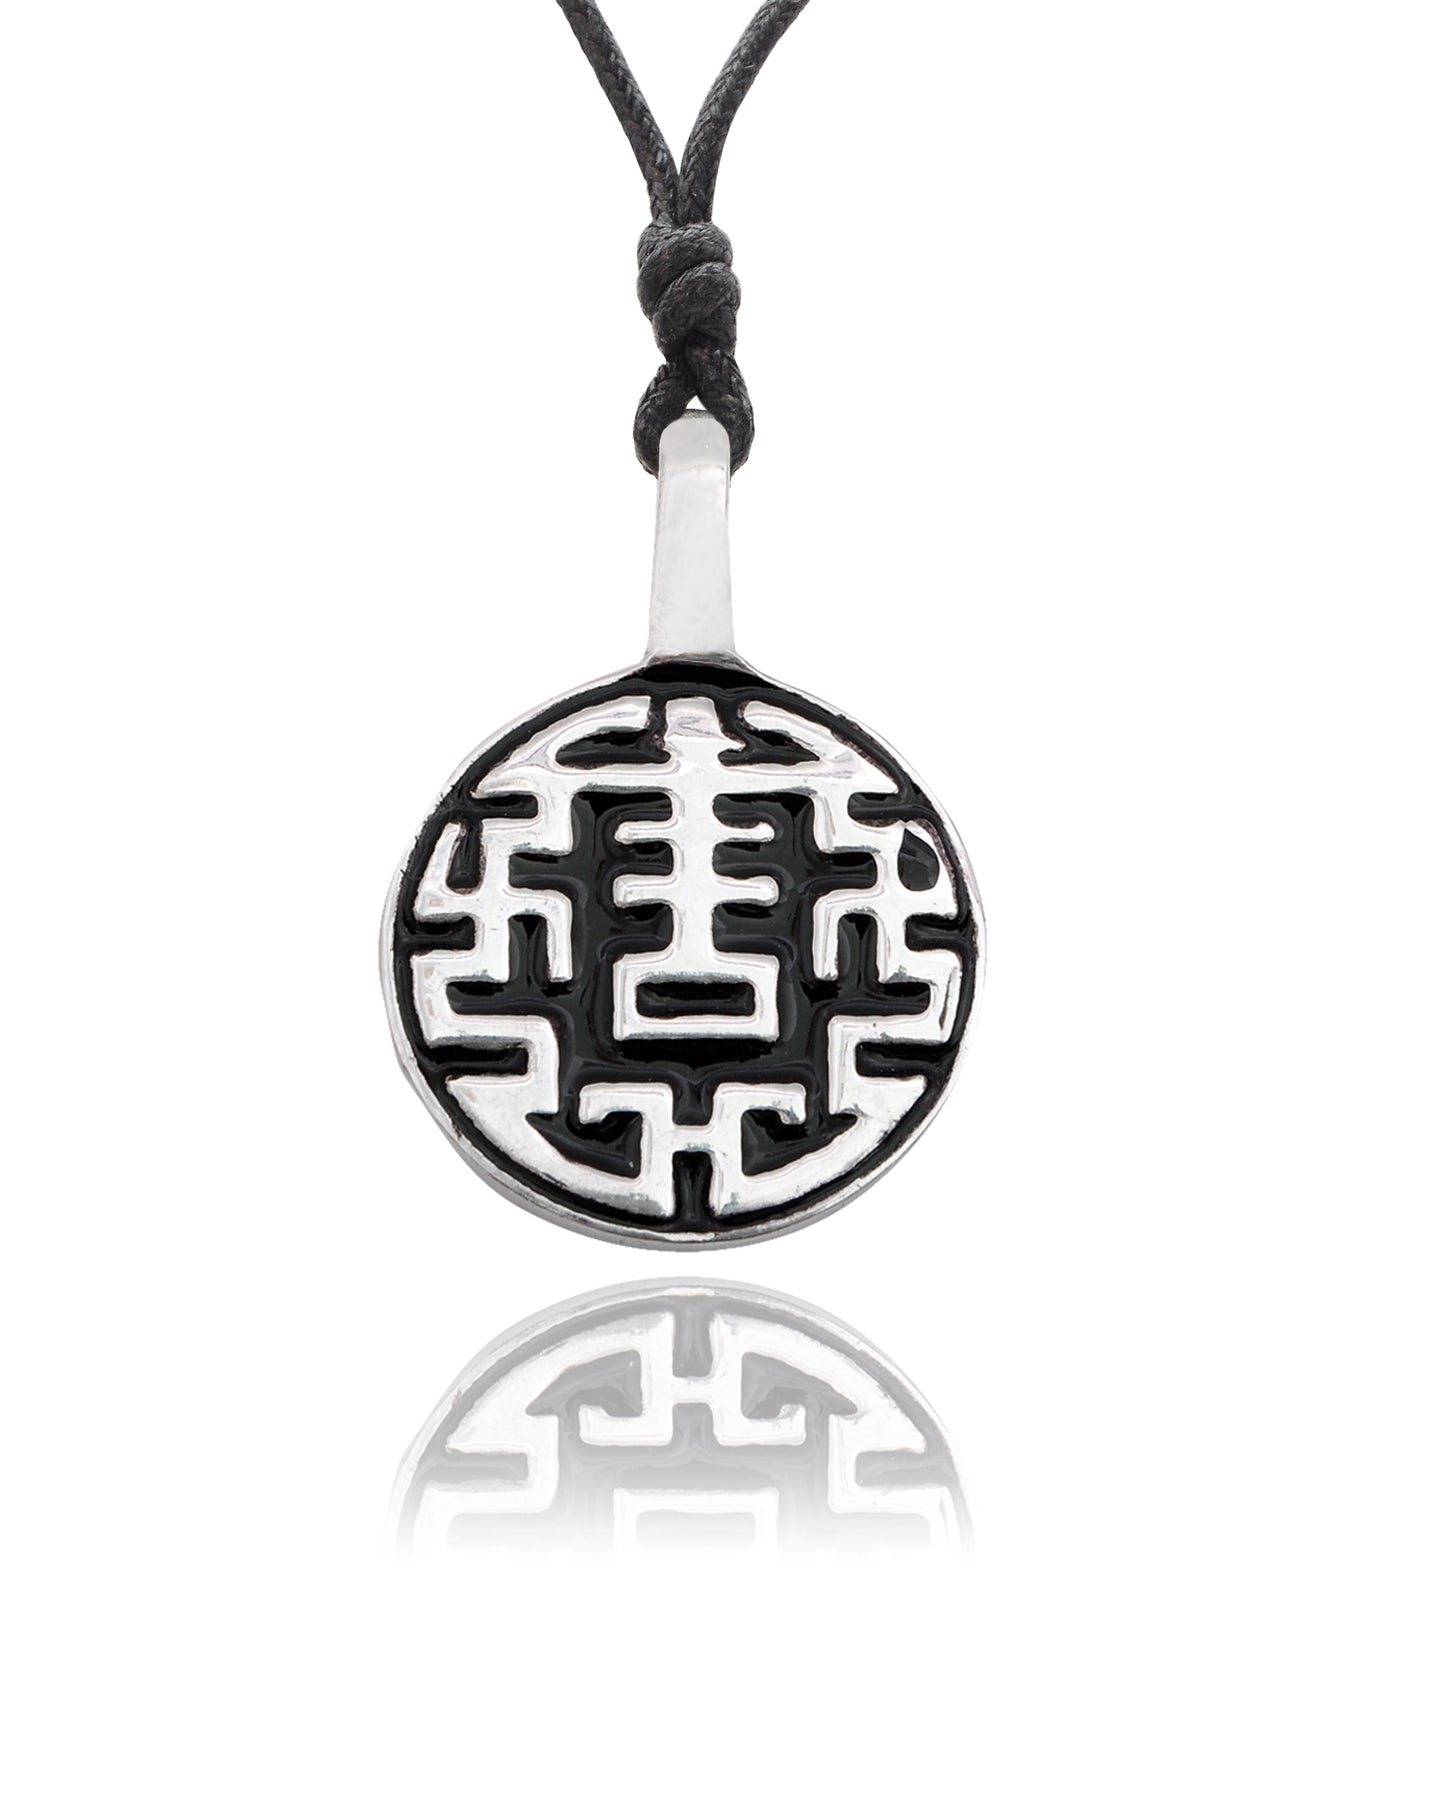 Chinese Lucky Design Silver Pewter Charm Necklace Pendant Jewelry